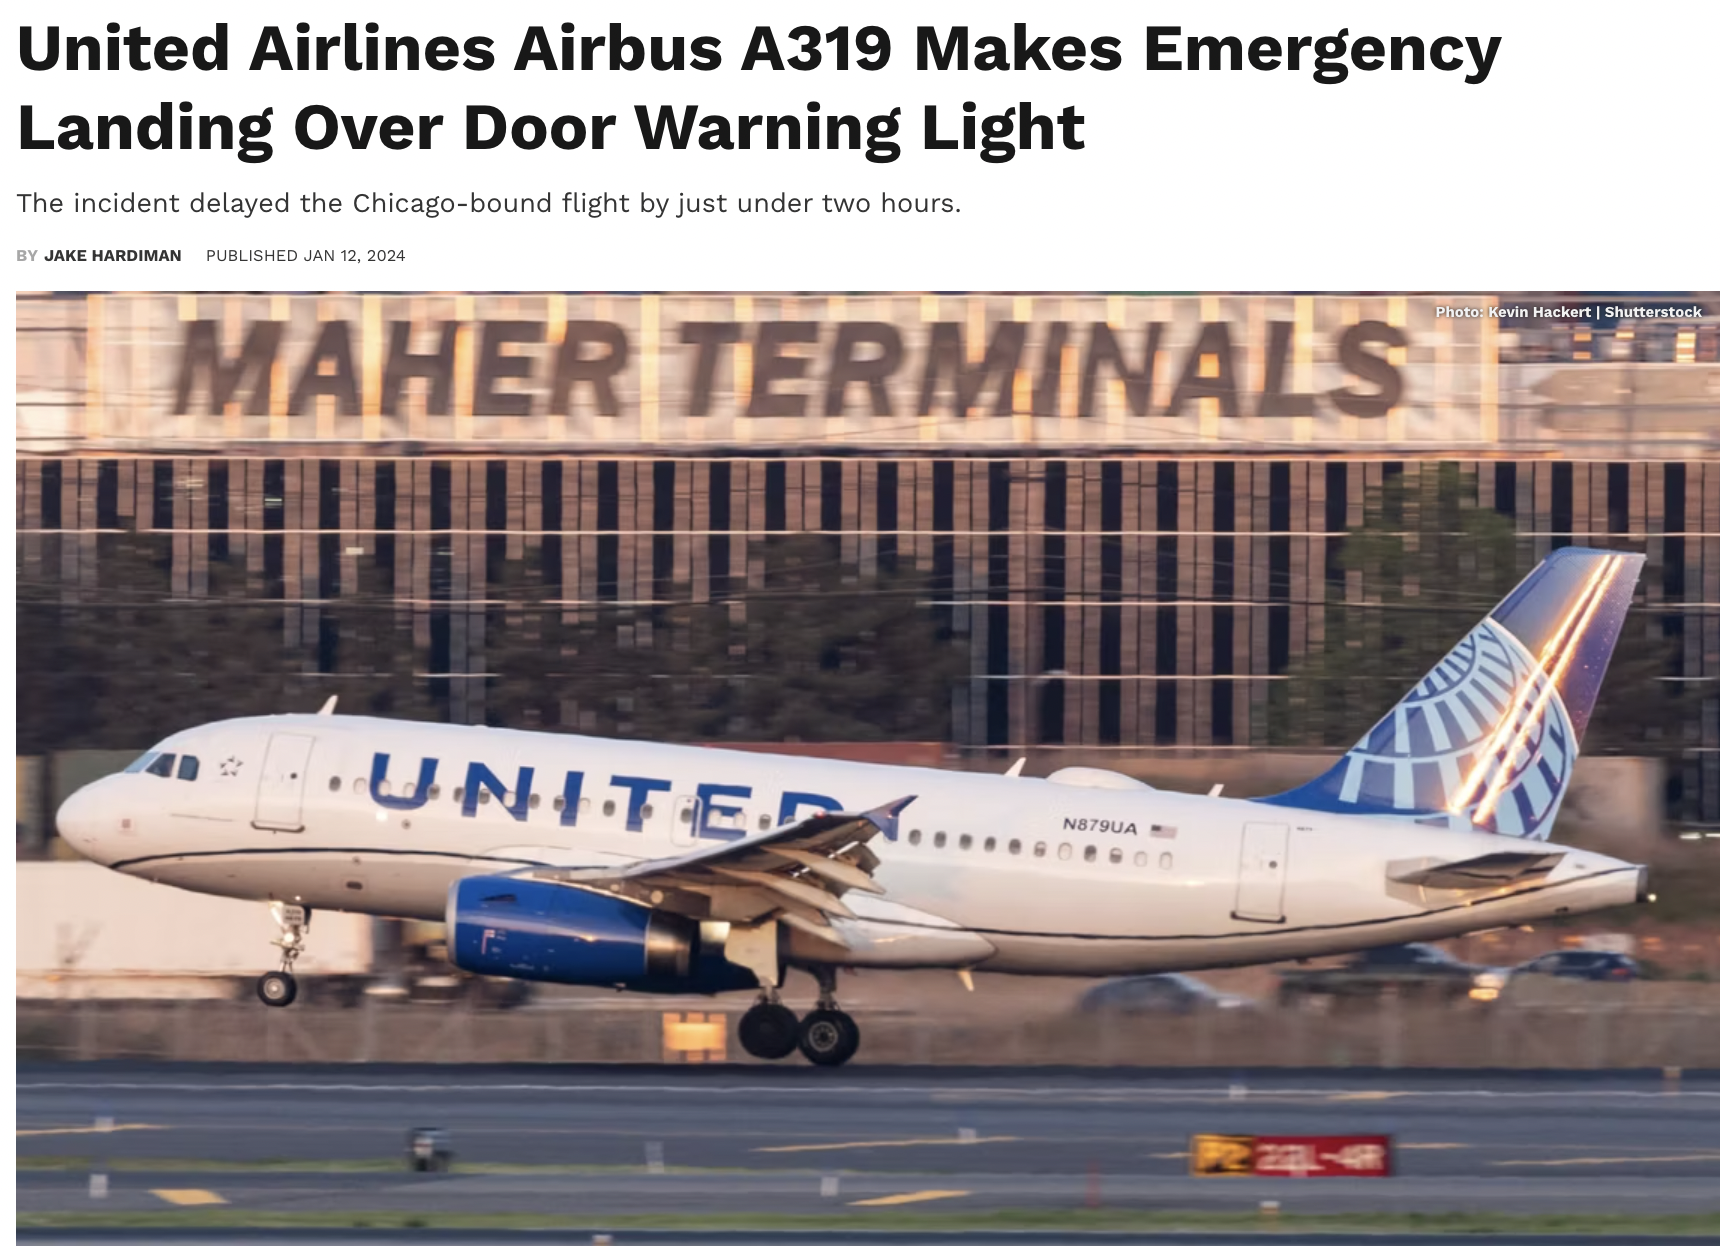 airline - United Airlines Airbus A319 Makes Emergency Landing Over Door Warning Light The incident delayed the Chicagobound flight by just under two hours. By Jake Hardiman Published Maher Terminals United. Netsua Epatol Kevin Hackert | Shutterstock